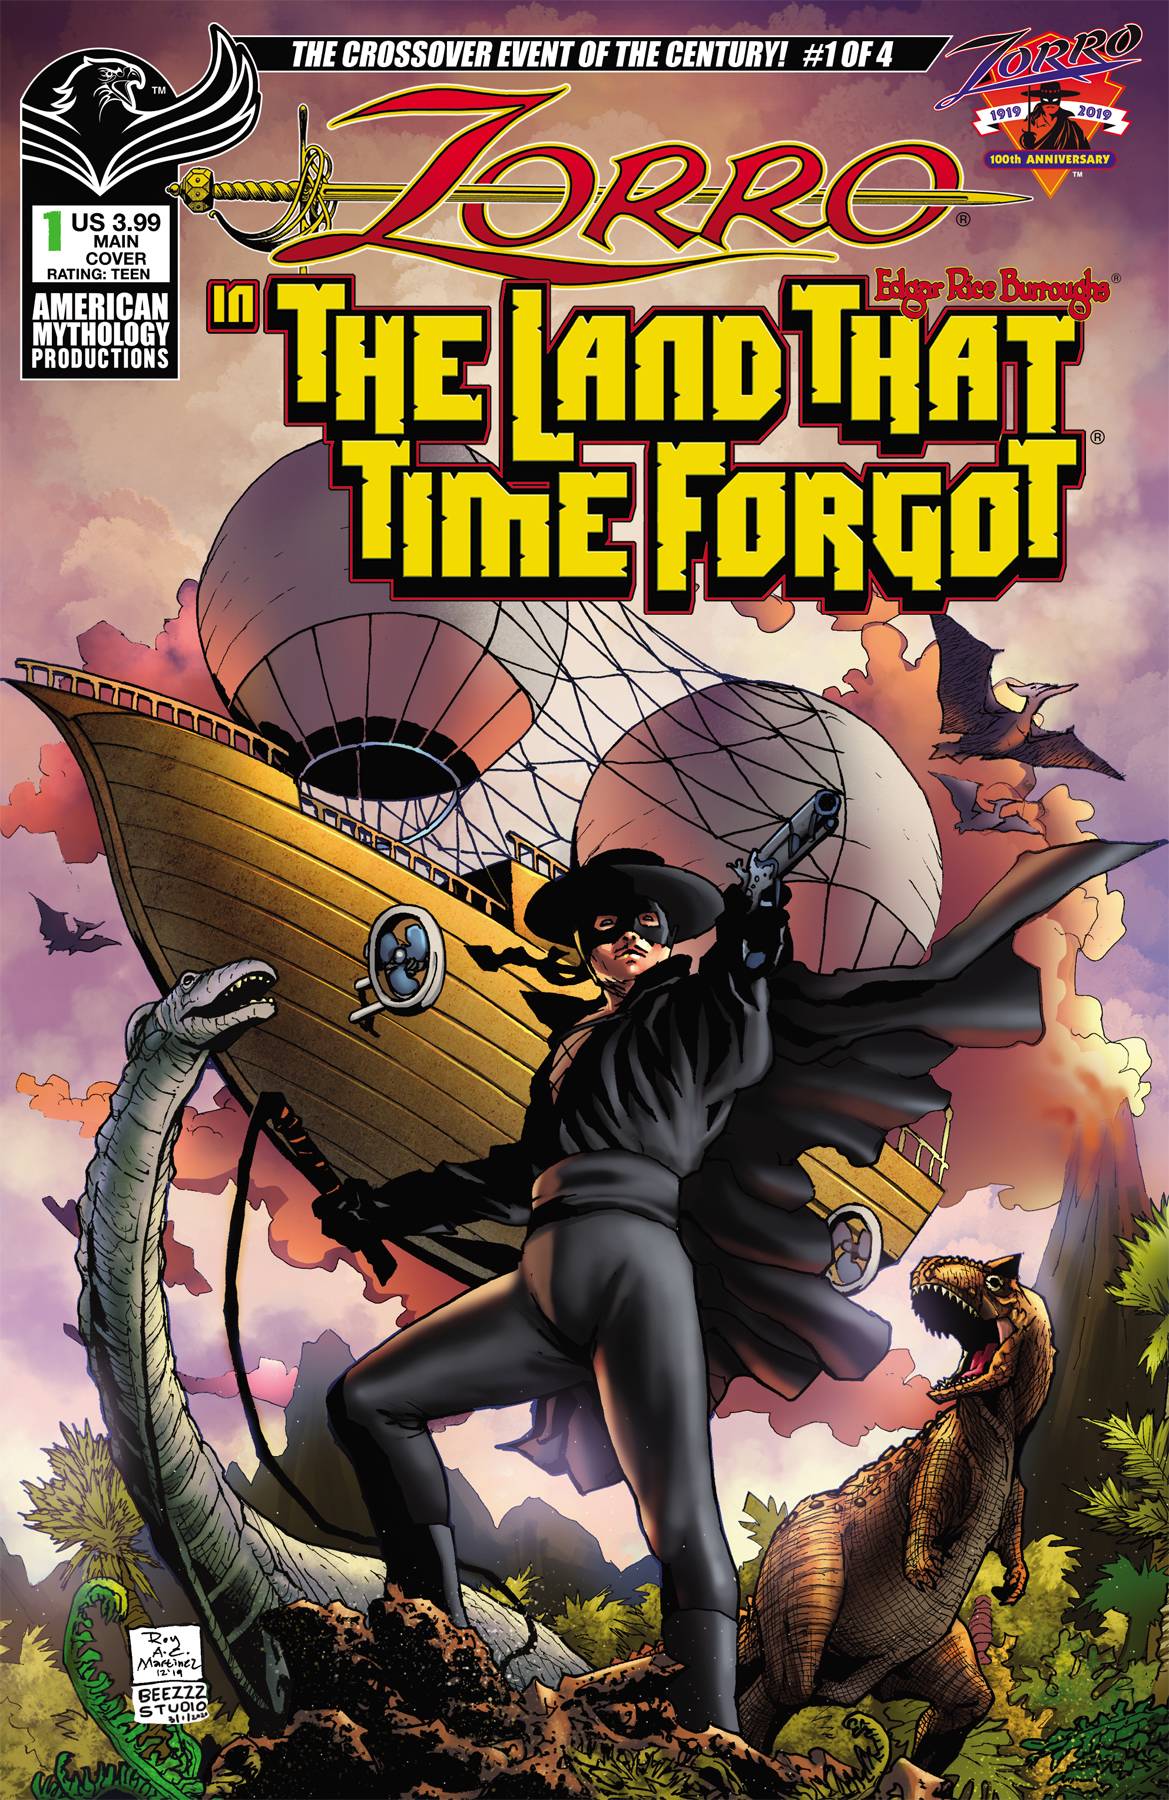 Zorro in The Land that Time Forgot no. 1 (2020 series)